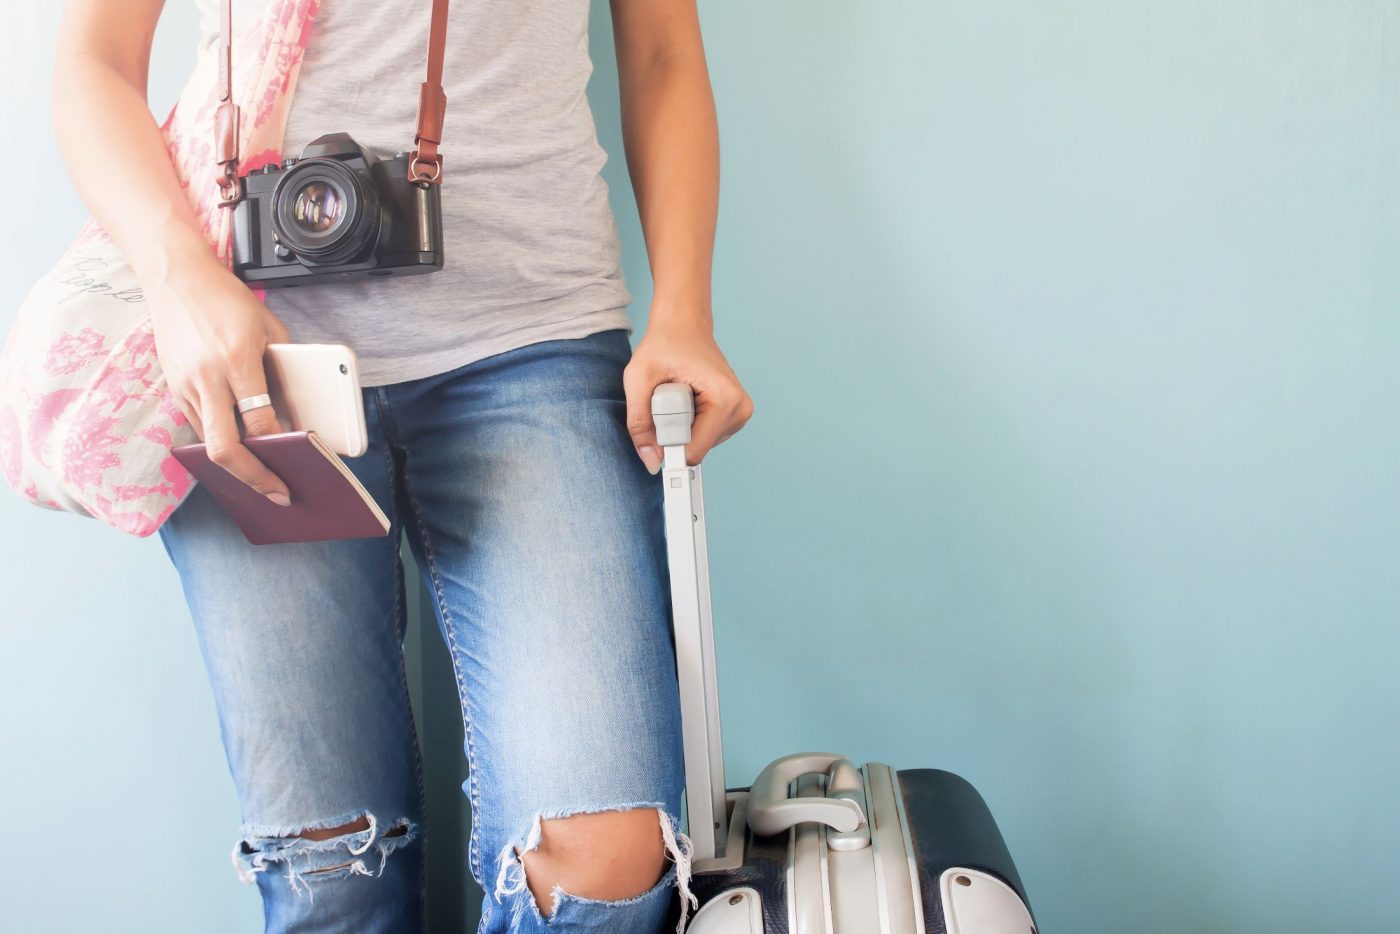 woman with camera and luggage ready to explore the world